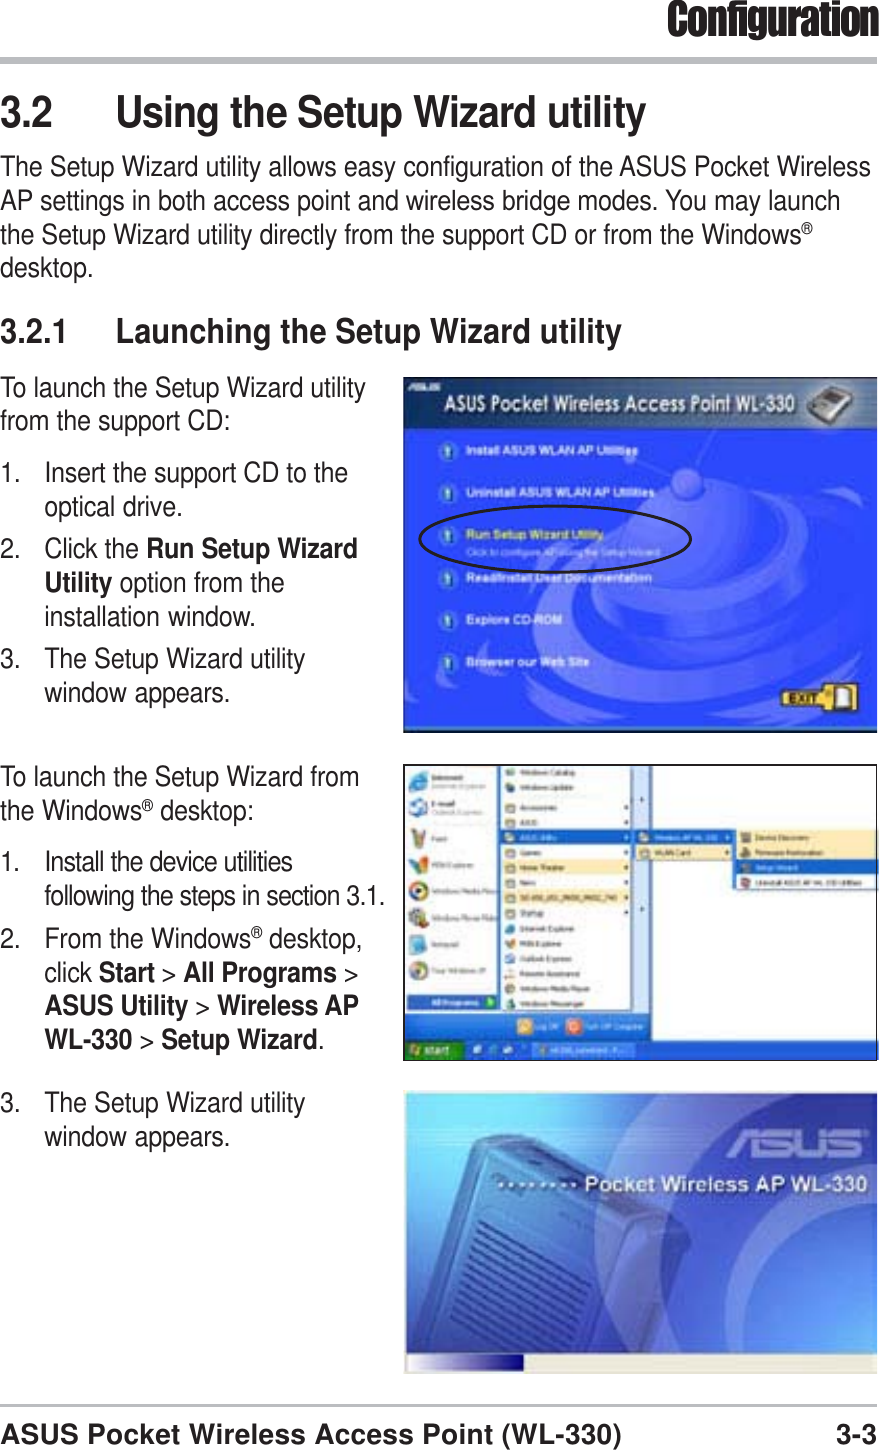 3-3ASUS Pocket Wireless Access Point (WL-330)Configuration3.2 Using the Setup Wizard utilityThe Setup Wizard utility allows easy configuration of the ASUS Pocket WirelessAP settings in both access point and wireless bridge modes. You may launchthe Setup Wizard utility directly from the support CD or from the Windows®desktop.3.2.1 Launching the Setup Wizard utilityTo launch the Setup Wizard utilityfrom the support CD:1. Insert the support CD to theoptical drive.2. Click the Run Setup WizardUtility option from theinstallation window.3. The Setup Wizard utilitywindow appears.To launch the Setup Wizard fromthe Windows® desktop:1. Install the device utilitiesfollowing the steps in section 3.1.2. From the Windows® desktop,click Start &gt;All Programs &gt;ASUS Utility &gt;Wireless APWL-330 &gt; Setup Wizard.3. The Setup Wizard utilitywindow appears.